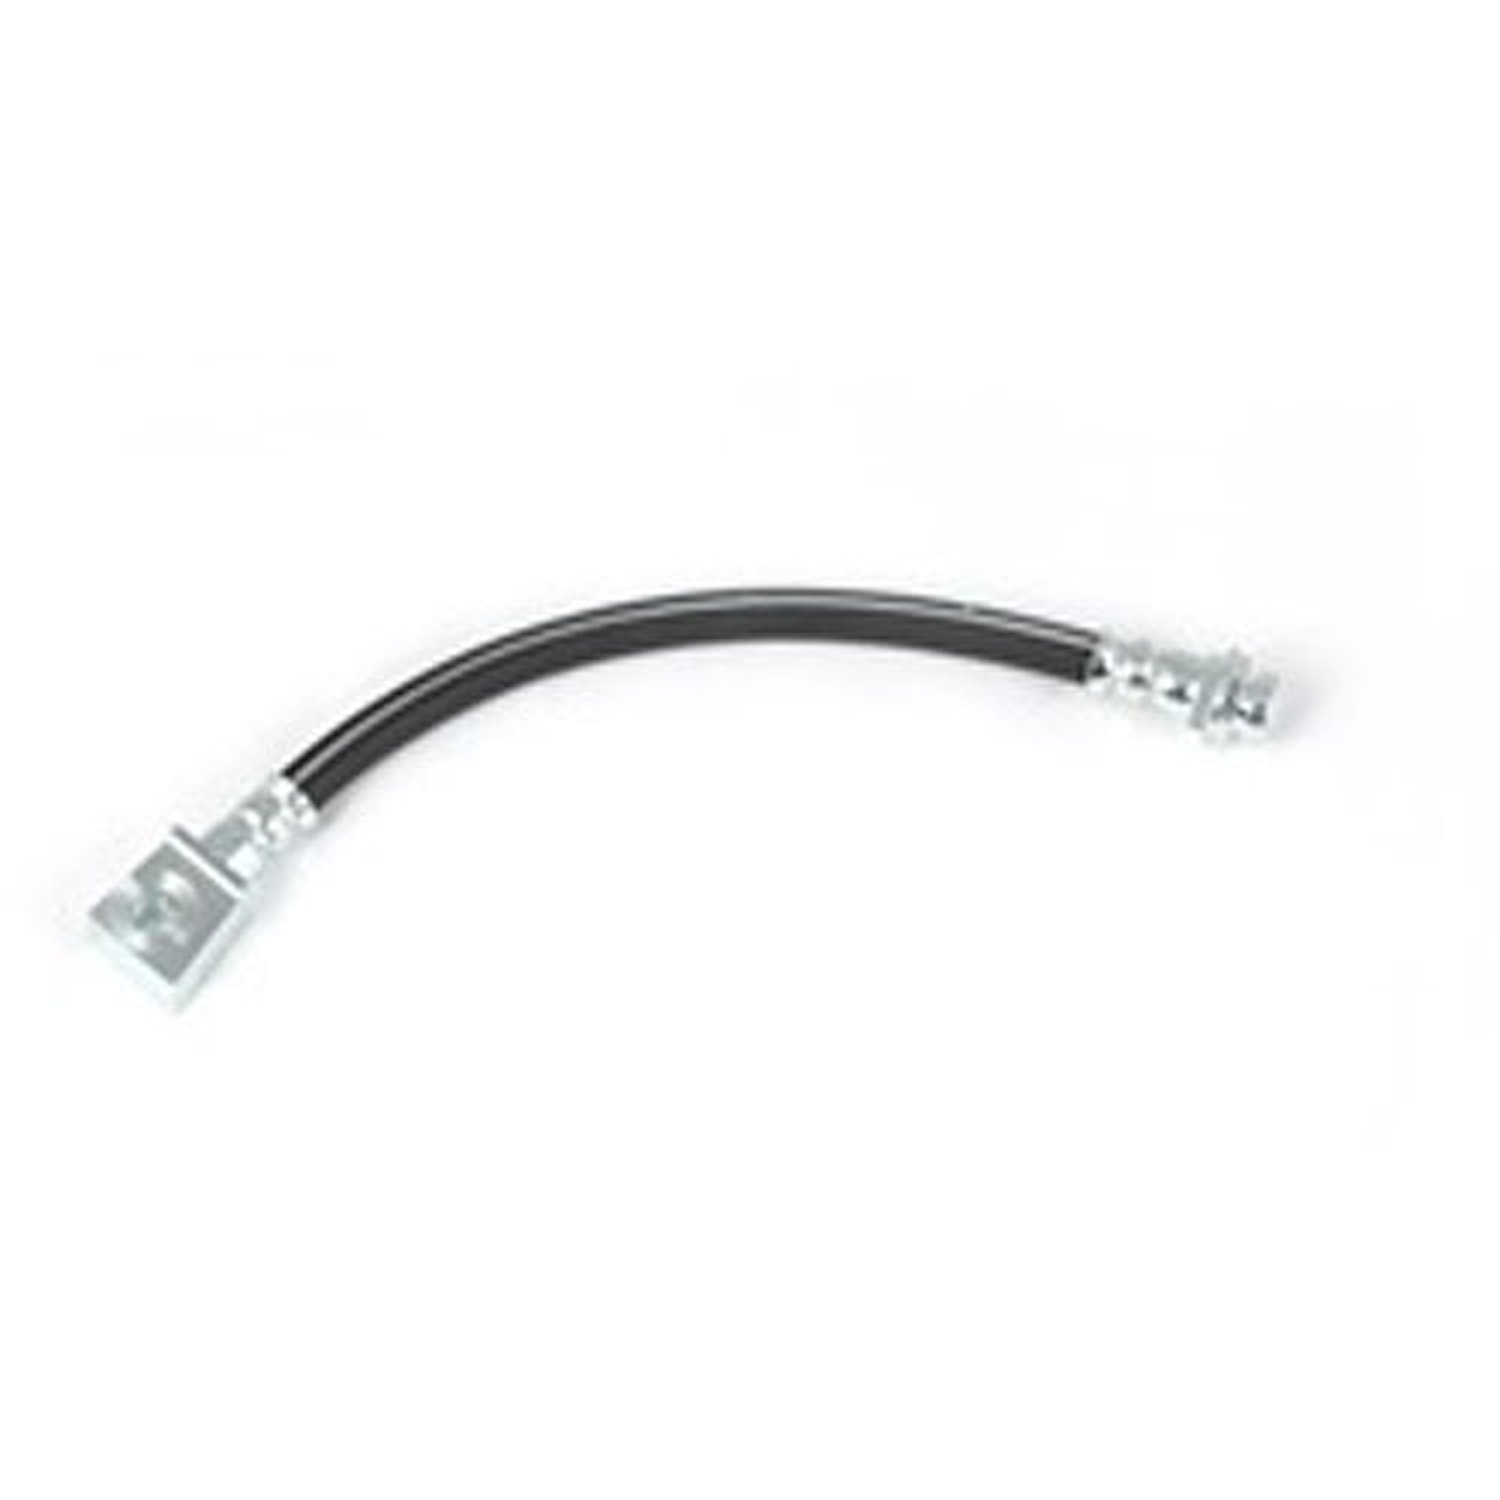 This left rear brake hose from Omix-ADA fits 03-05 Jeep Libertys with rear disc brakes.